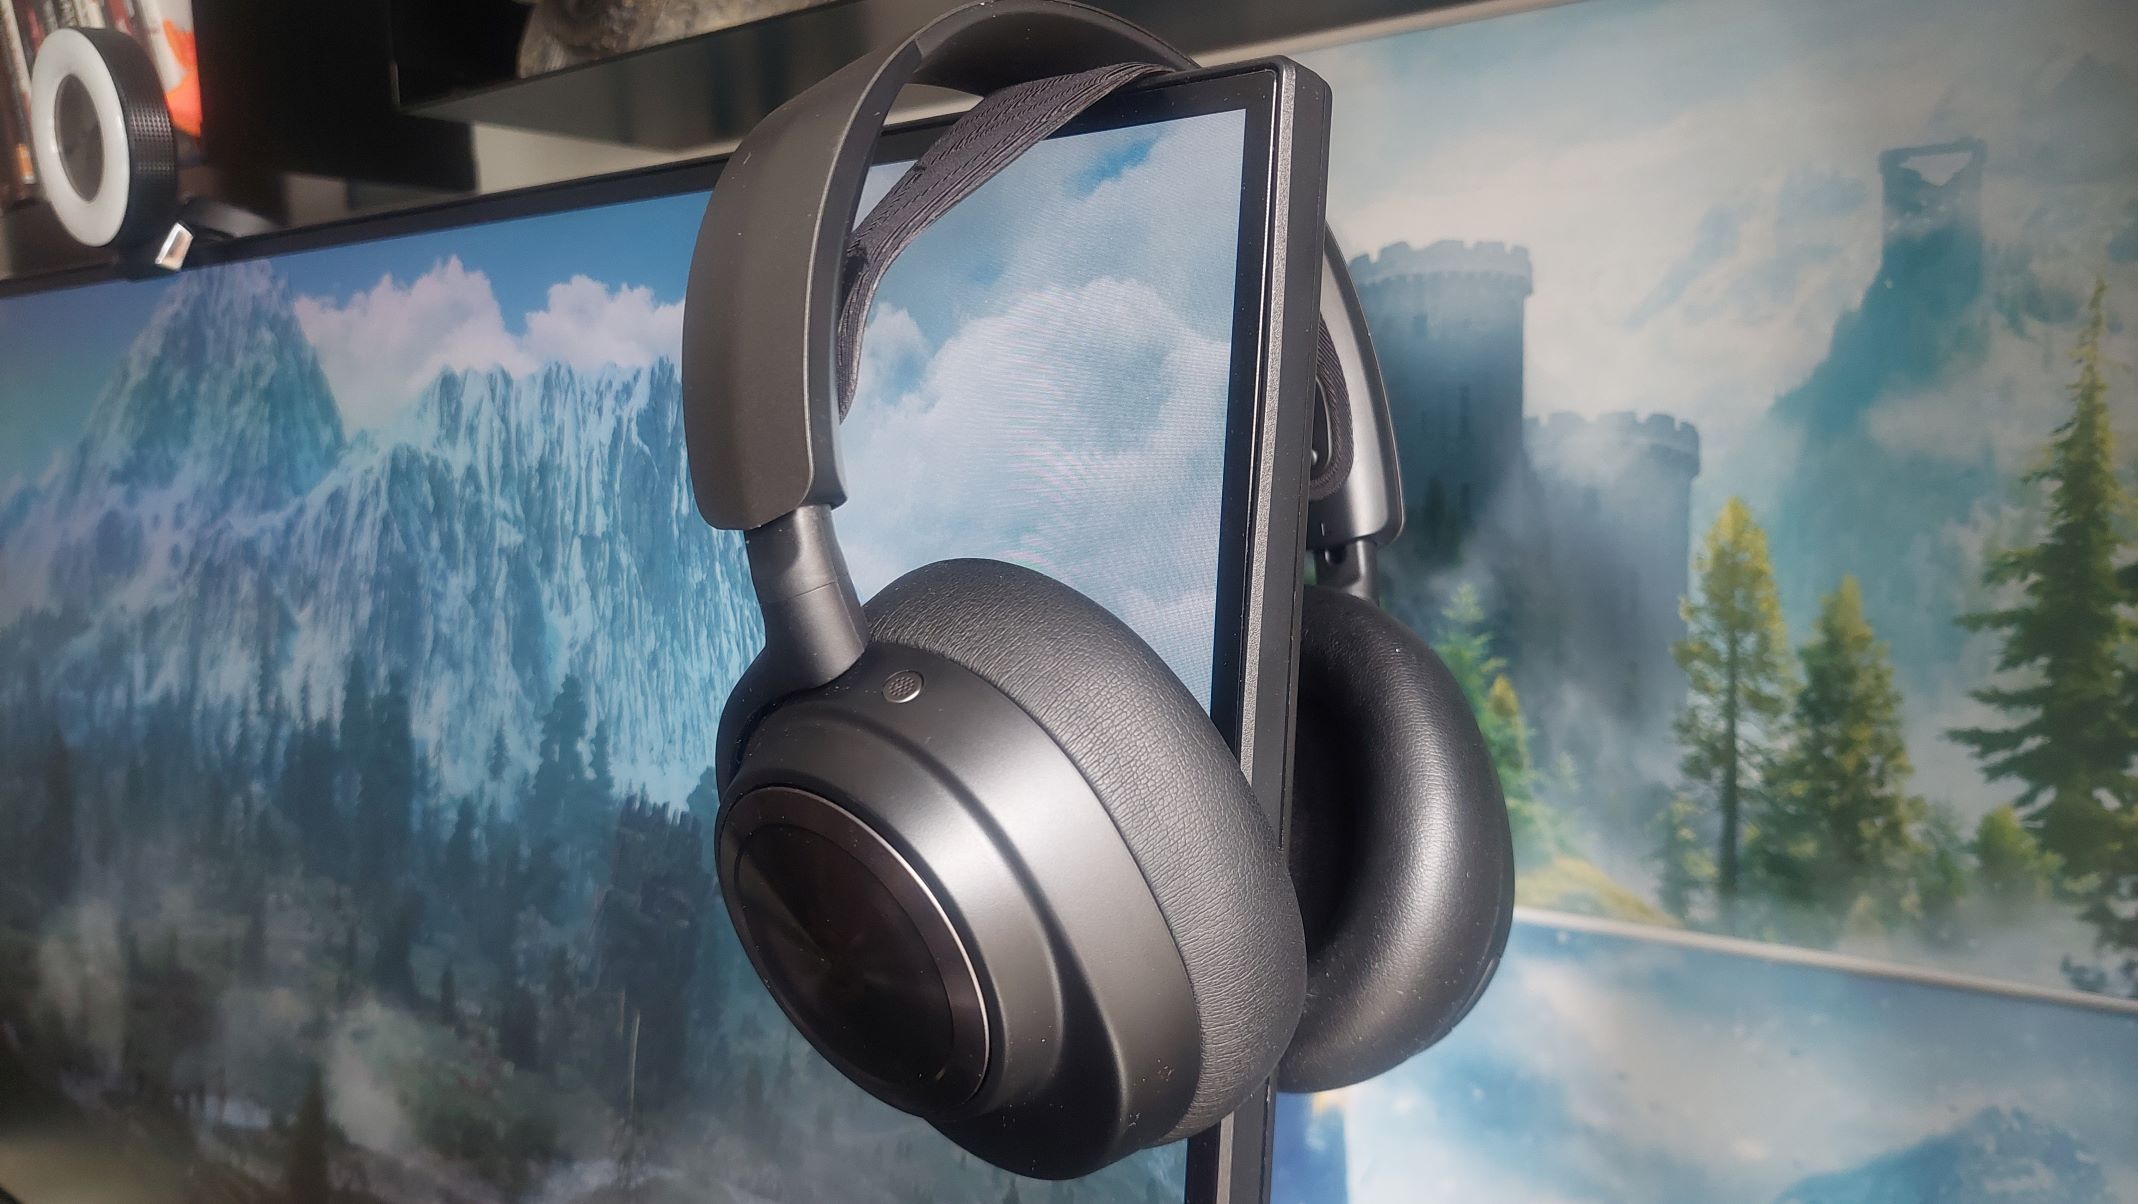 How To Limit The Distance Sound Is Picked Up On A PC Gaming Headset